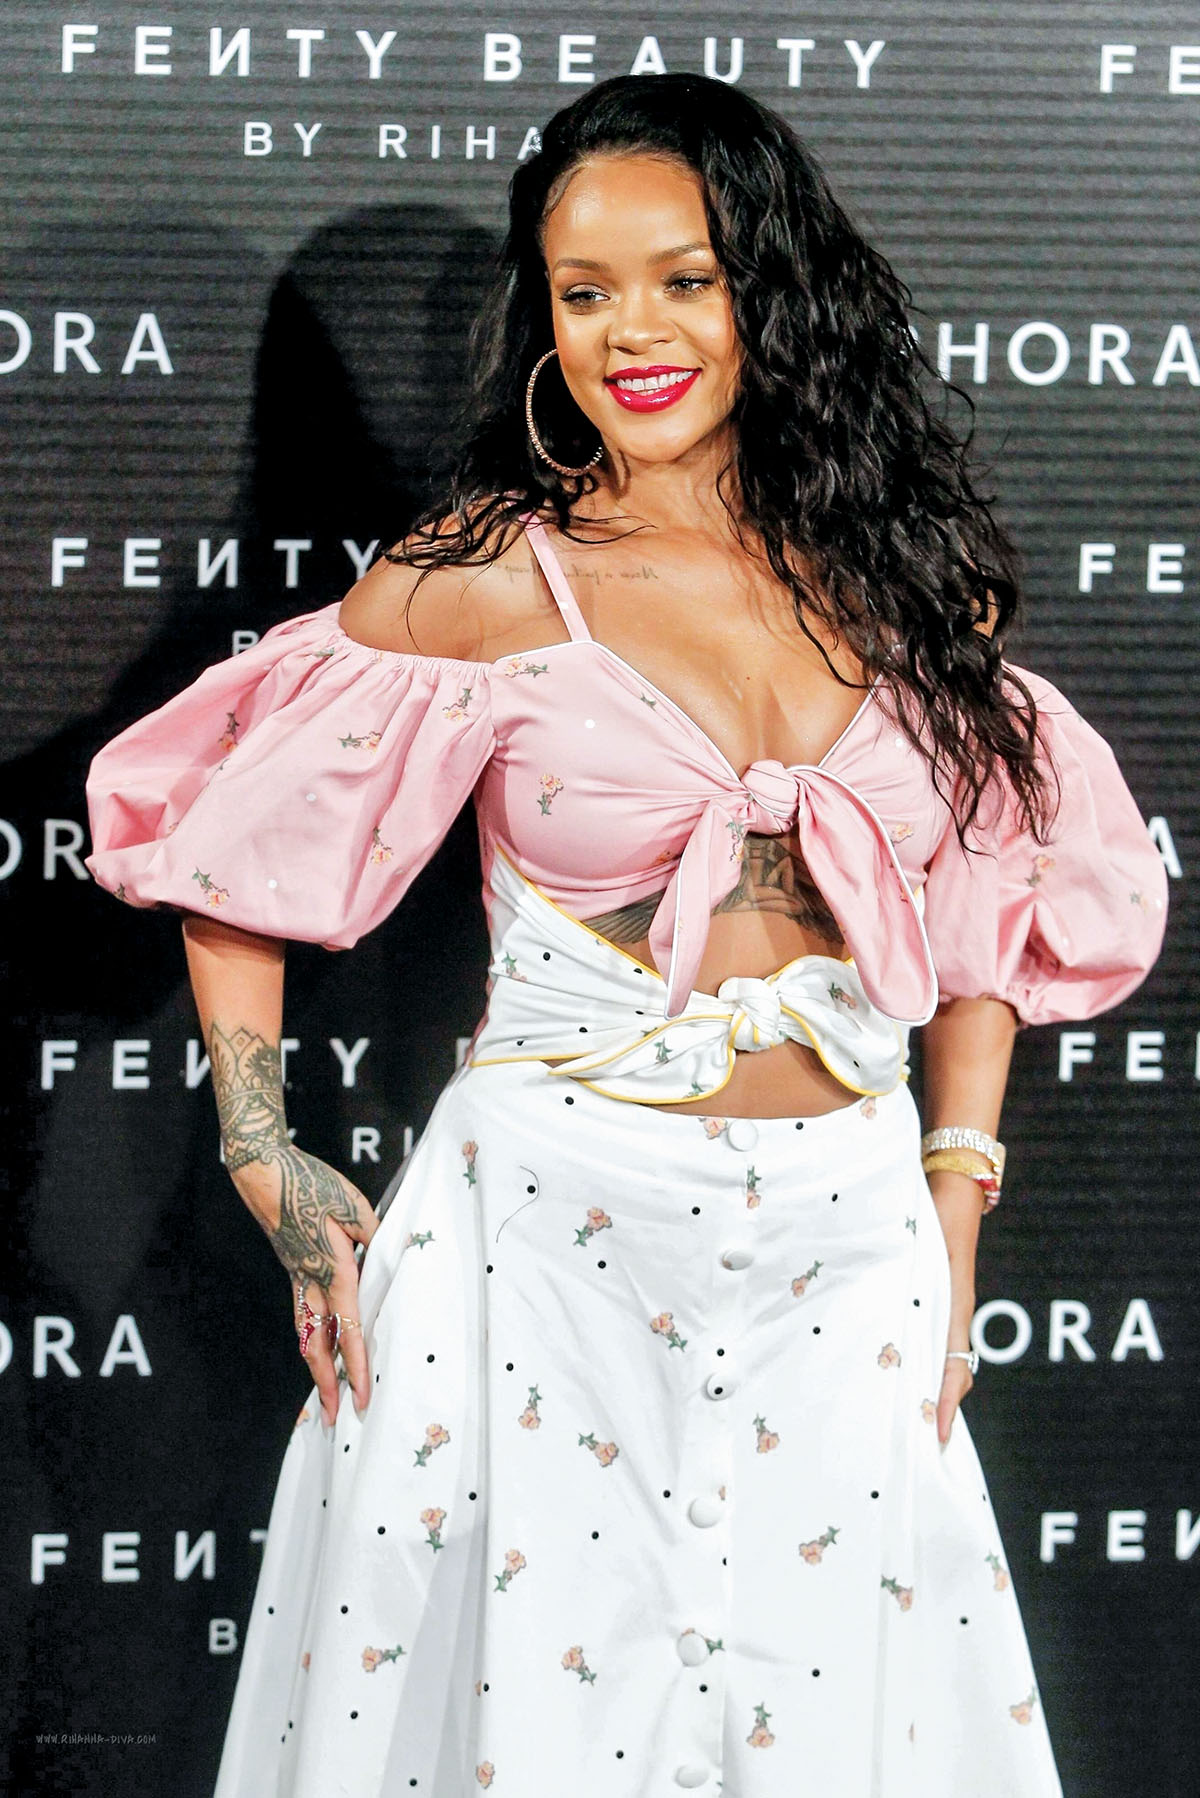 Pop icon Rihanna wears a skirt and top by Ukrainian designer Marianna Senchina during a photo call in Madrid on Sept. 23. 